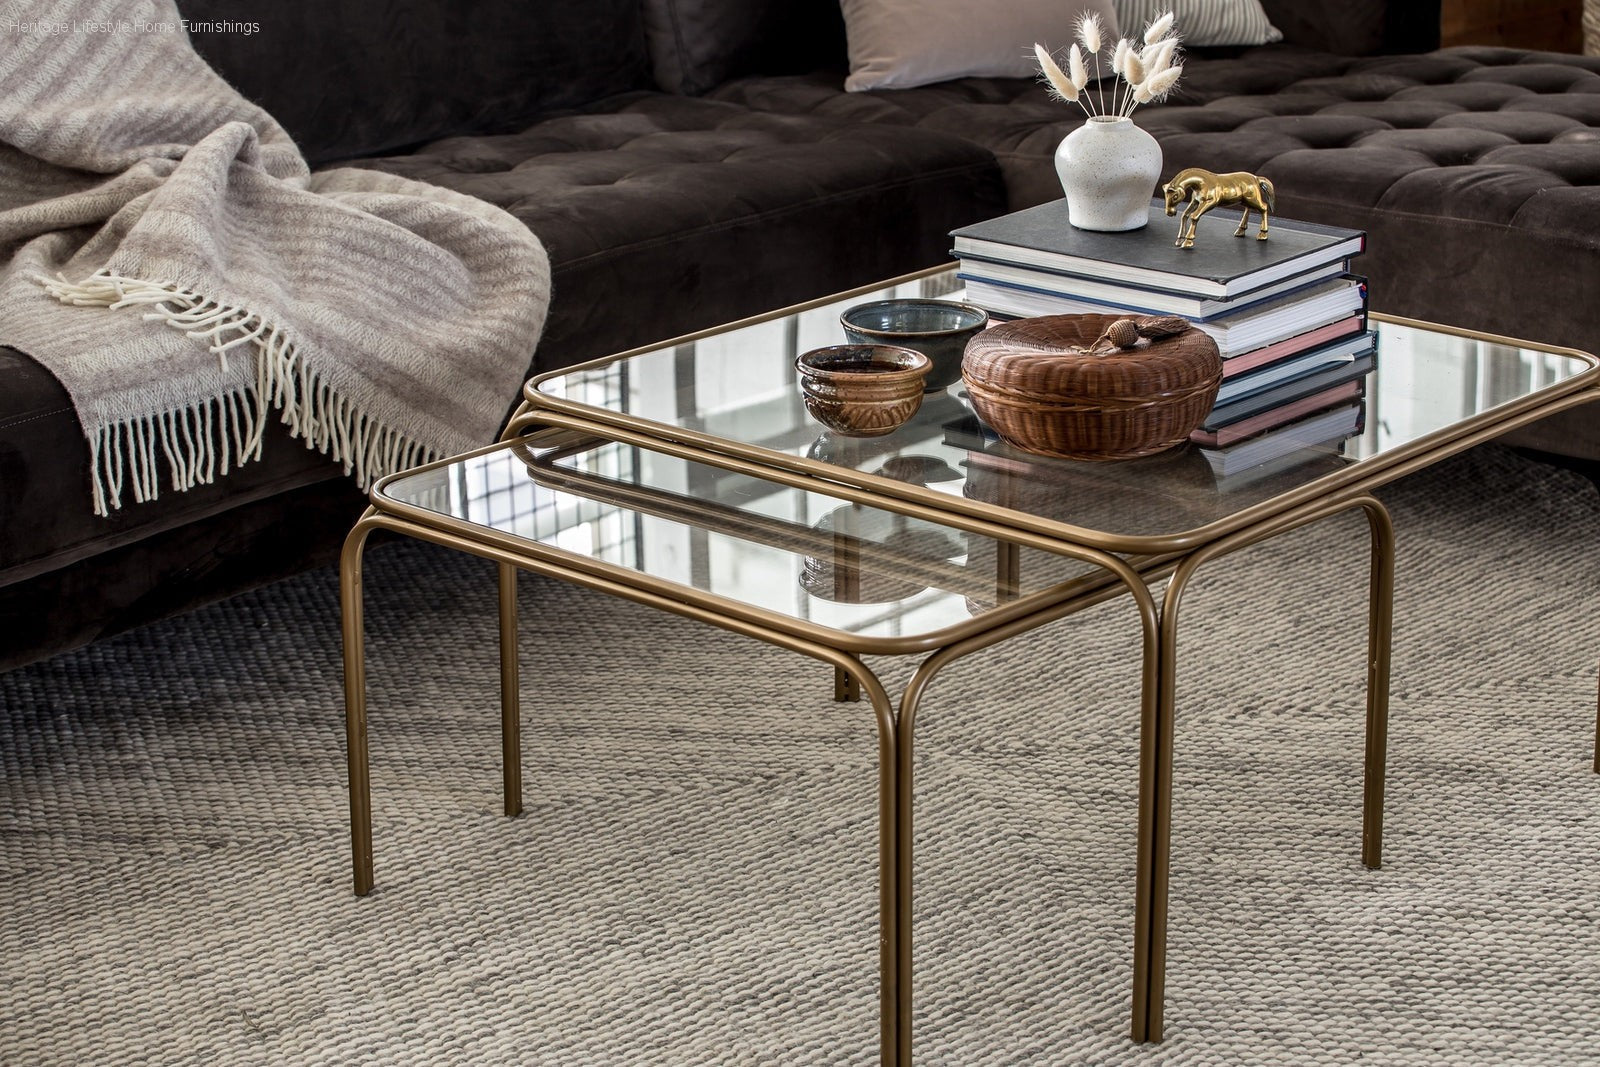 HLHF Deco Coffee Table - Gold Living, Occasional Furniture Store Burlington Ontario Near Me 